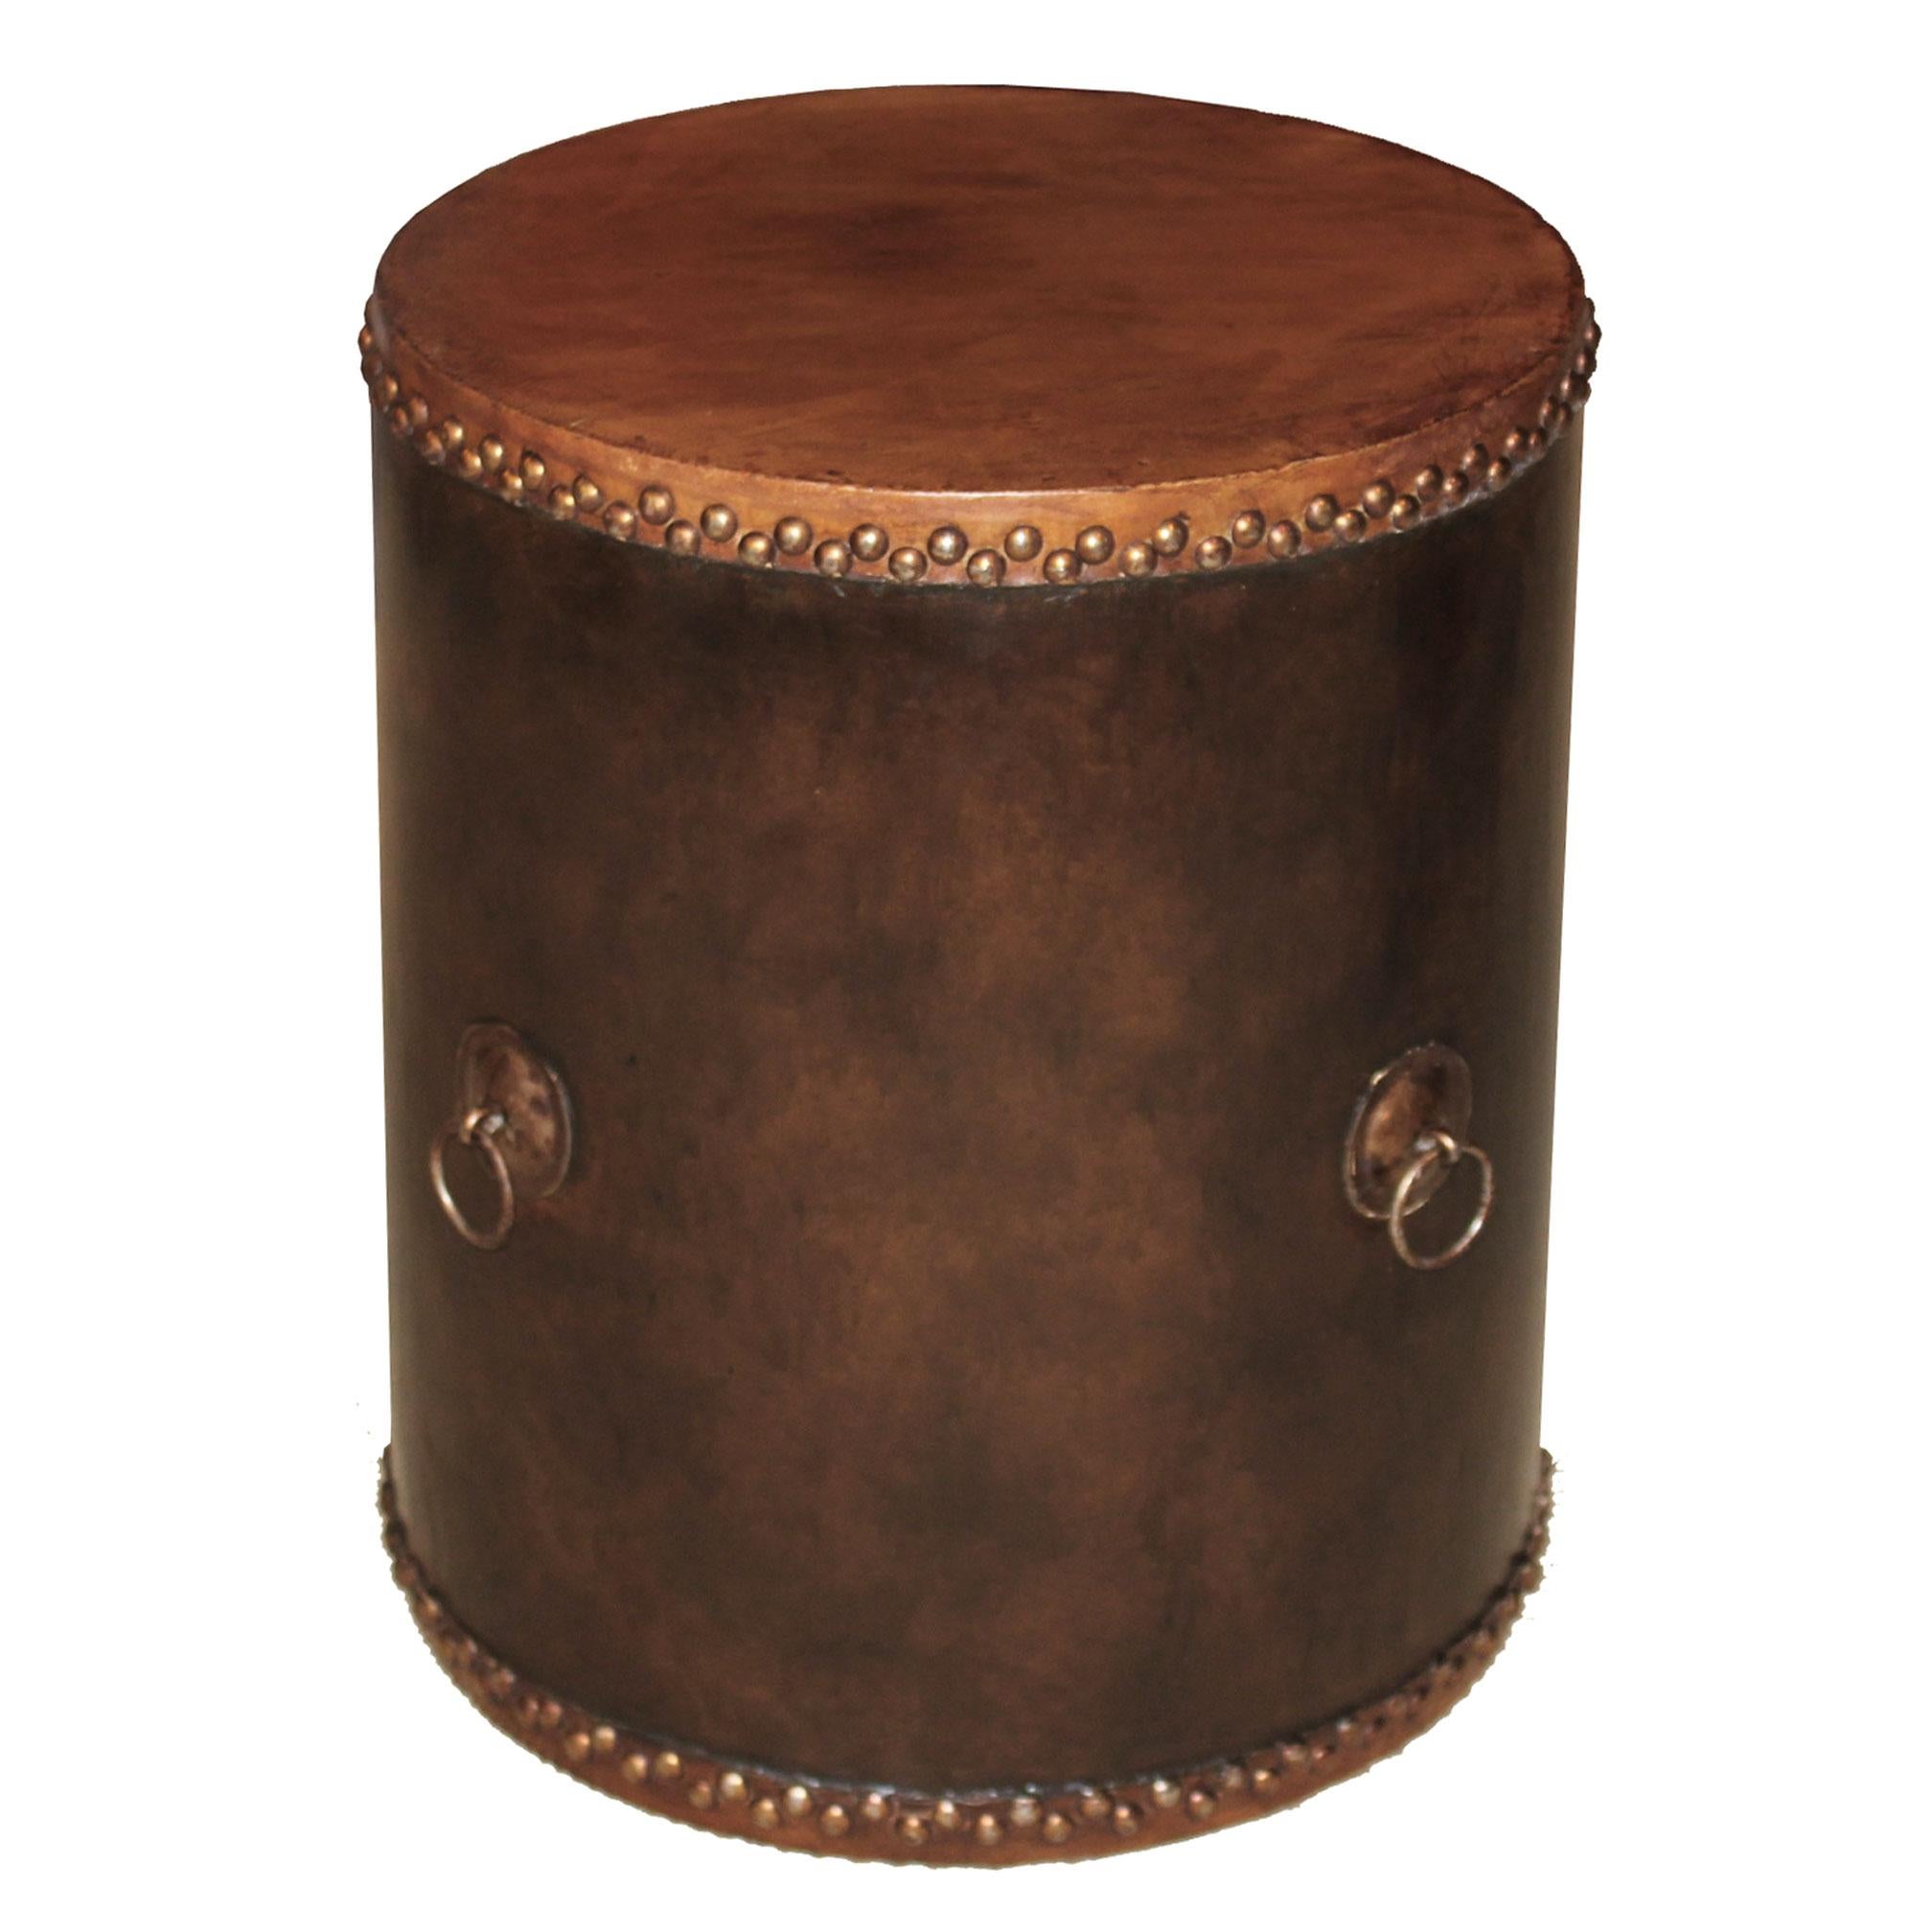 Contemporary wood and leather drum can be used as a side table next to a lounge chair or as a plant stand.